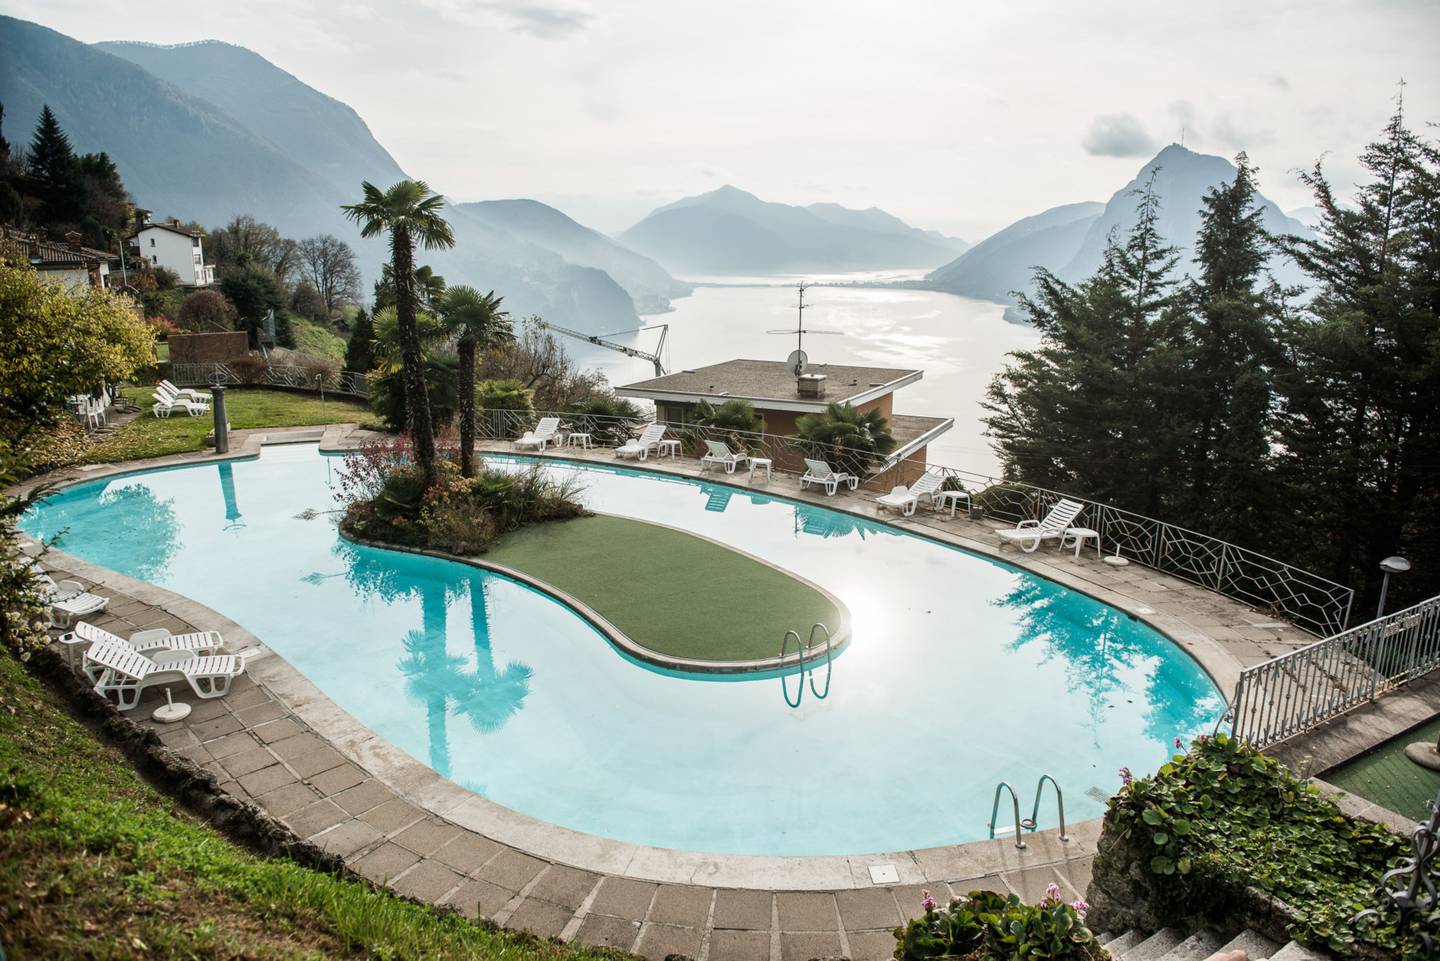 The swimming pool of a luxury residential property overlooks Lake Lugano from the hillside of Monte Bre, in Lugano, Switzerland.